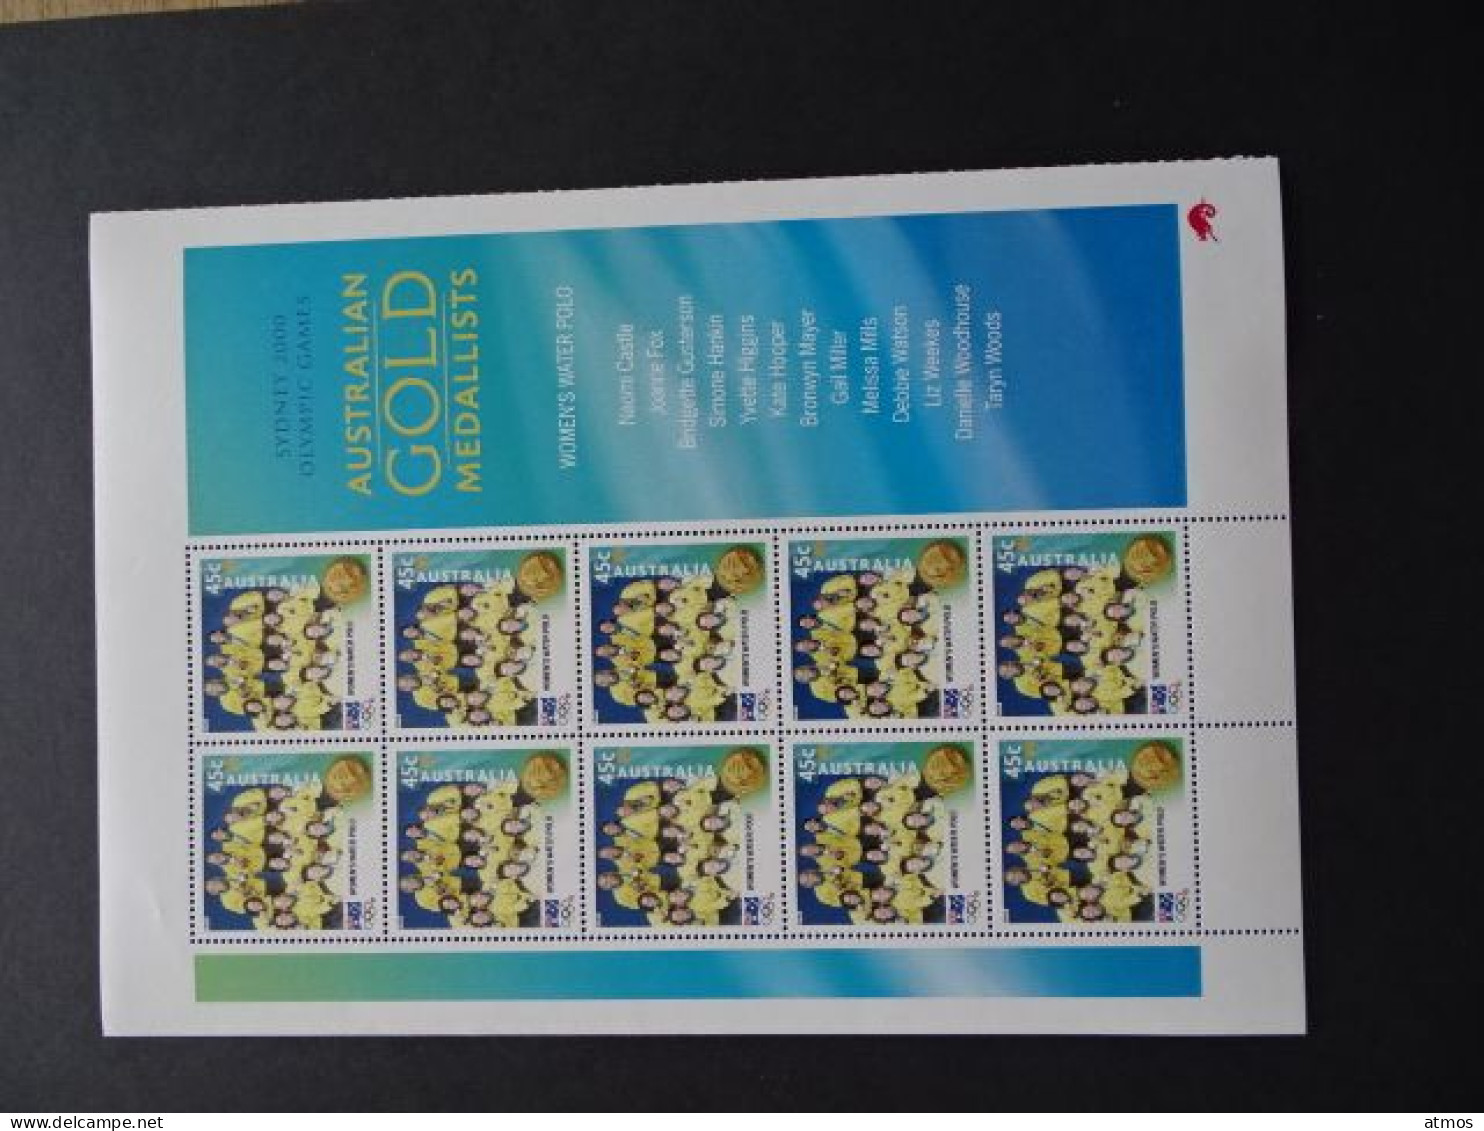 Australia MNH Michel Nr 1986 Sheet Of 10 From 2000 VIC - Mint Stamps